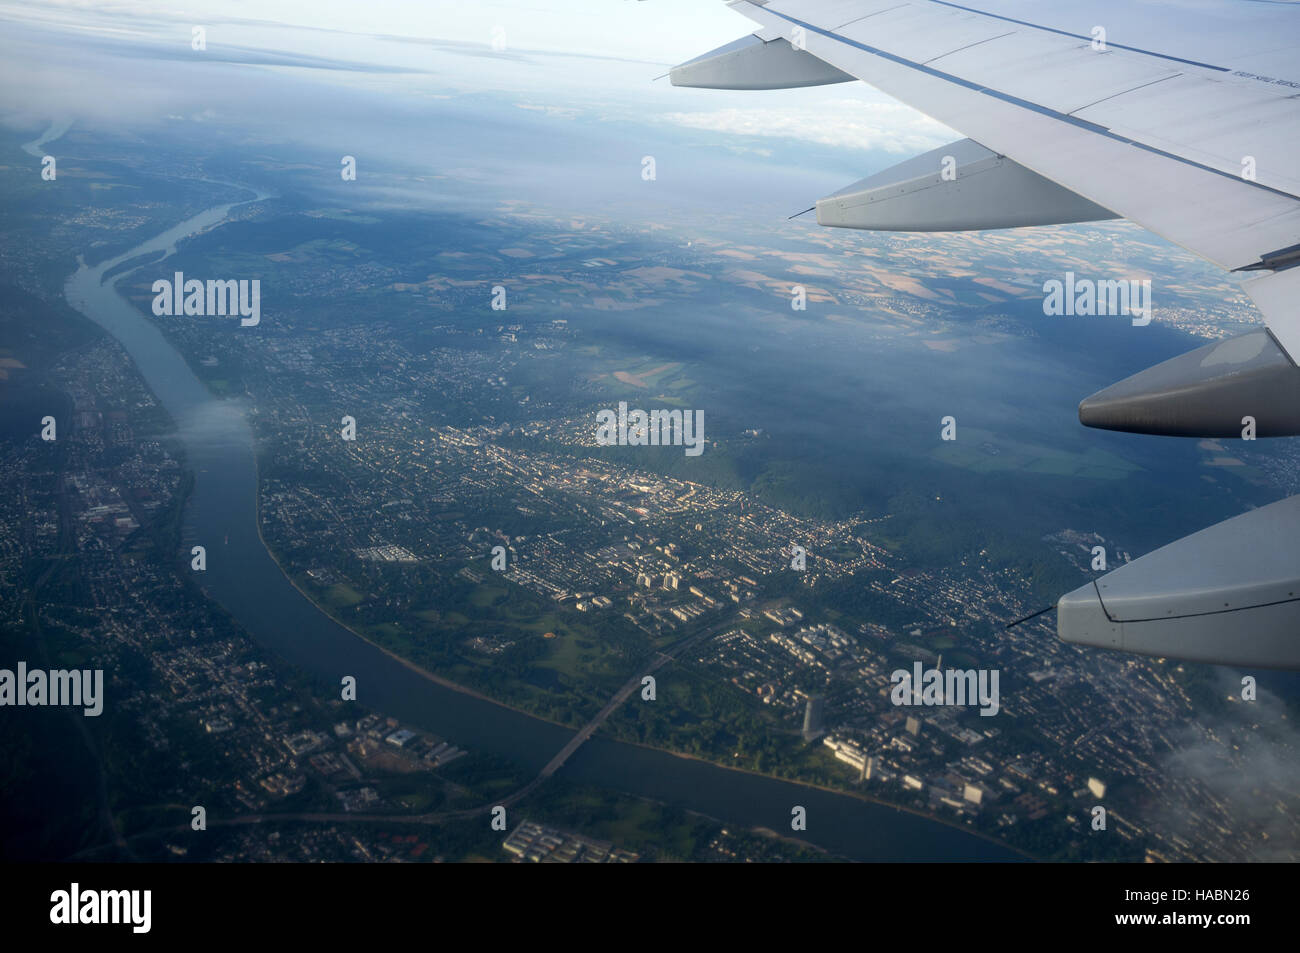 Airbus A319 wing over the river Rhine, Bonn, Germany. Stock Photo